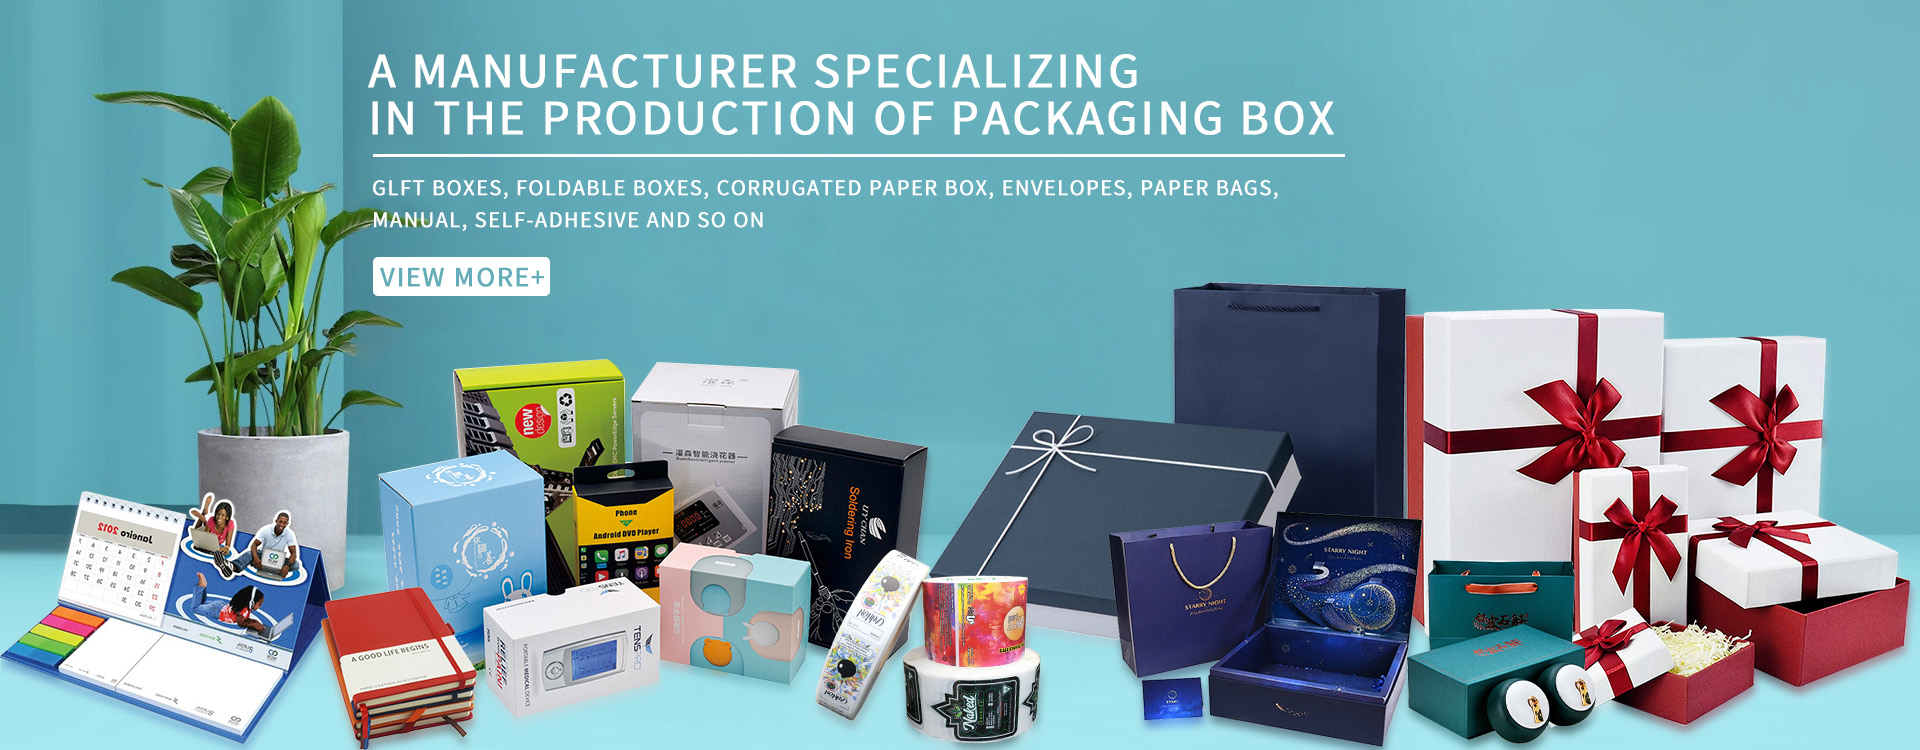 A manufacturer specializing in the production o f packaging box